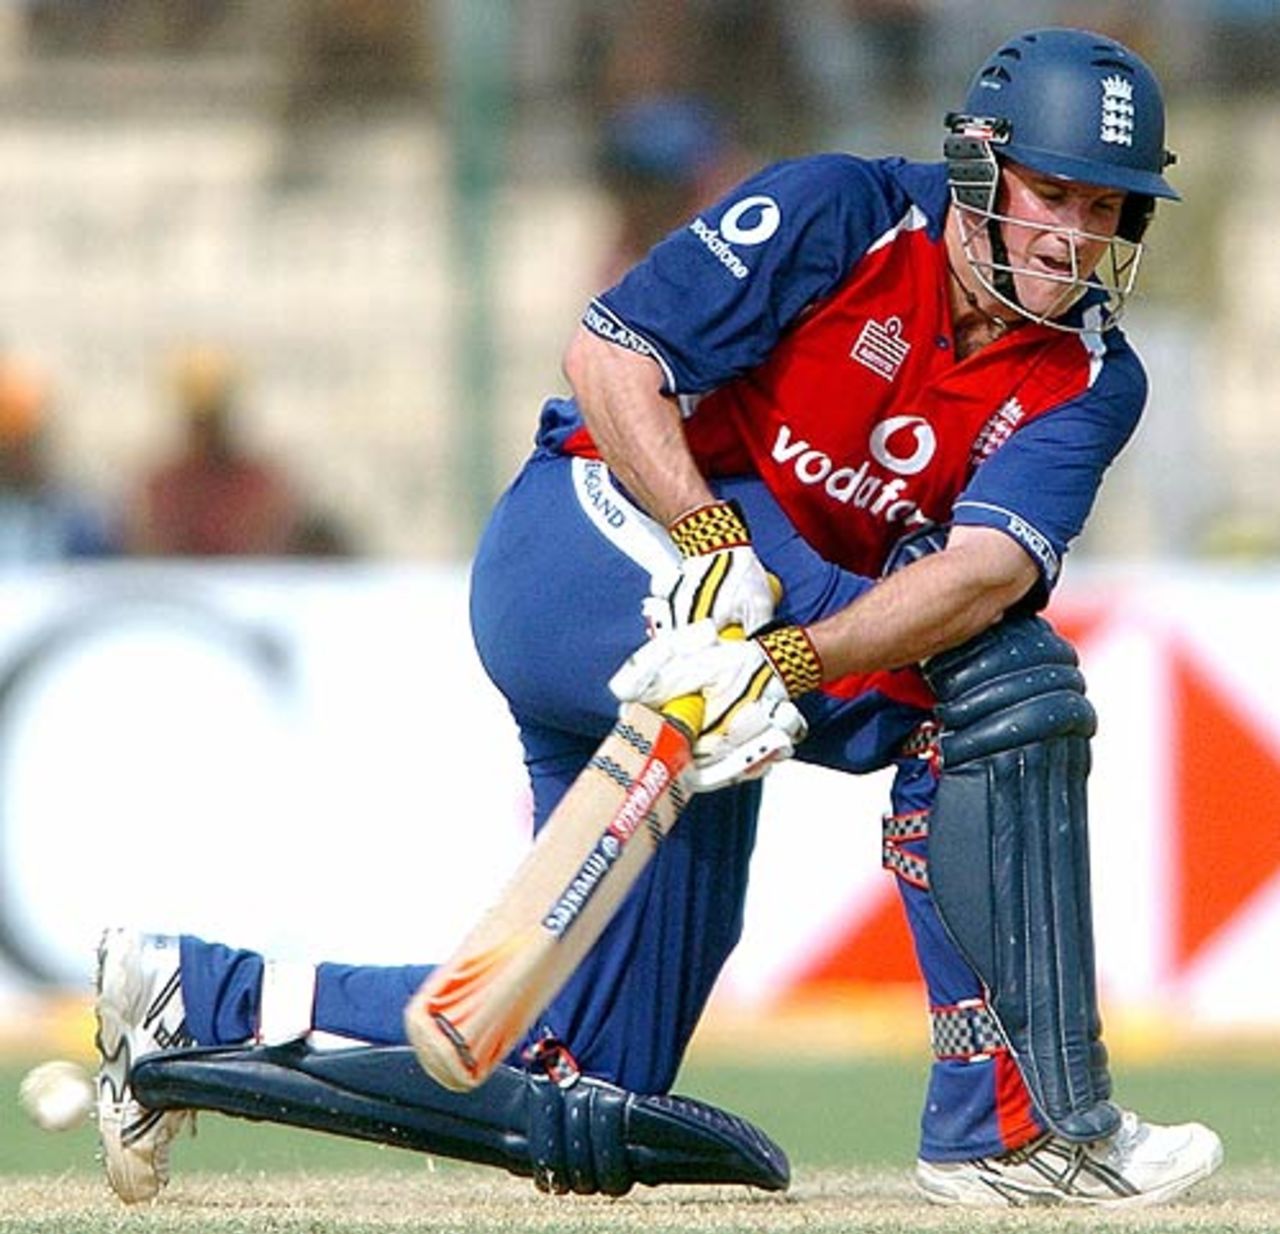 Andrew Strauss sweeps during his fifty, India v England, 6th ODI, Jamshedpur, April 12, 2006